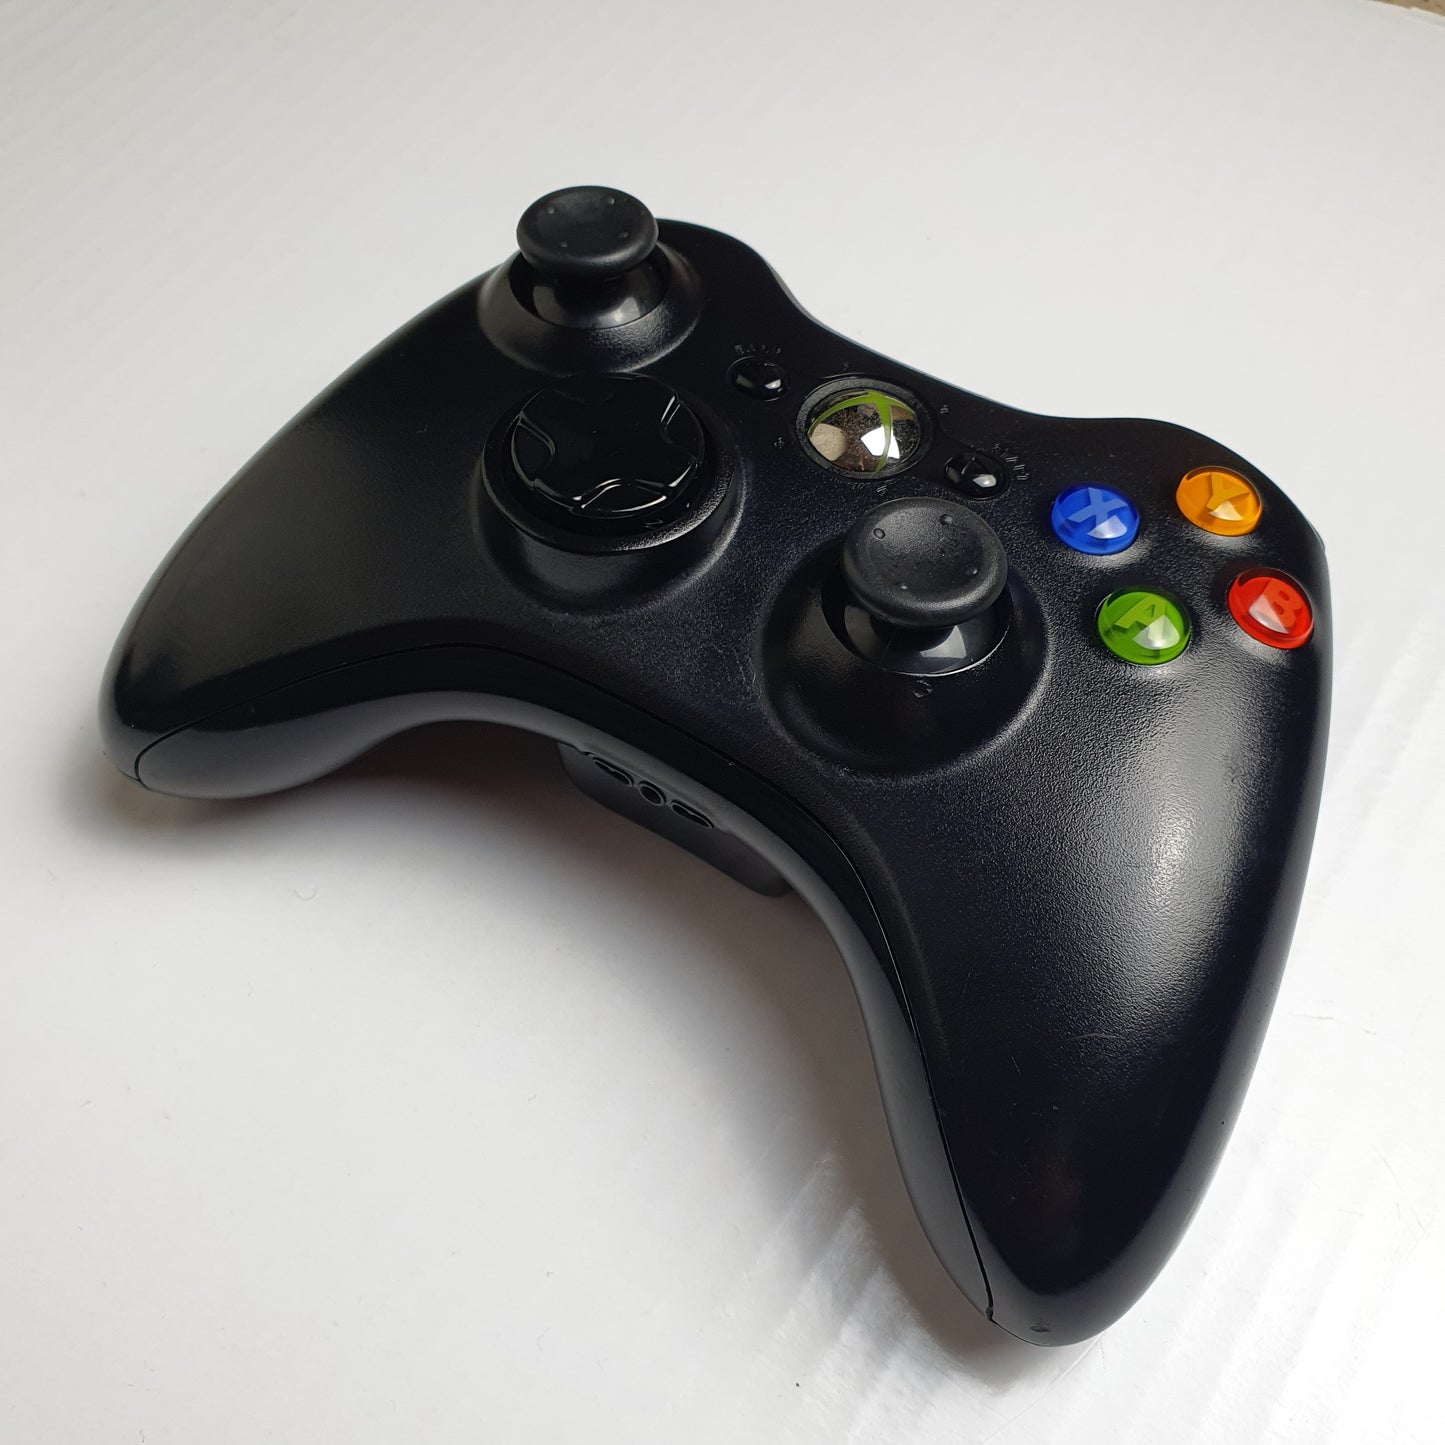 Official Microsoft Xbox 360 S Wireless Black Controller